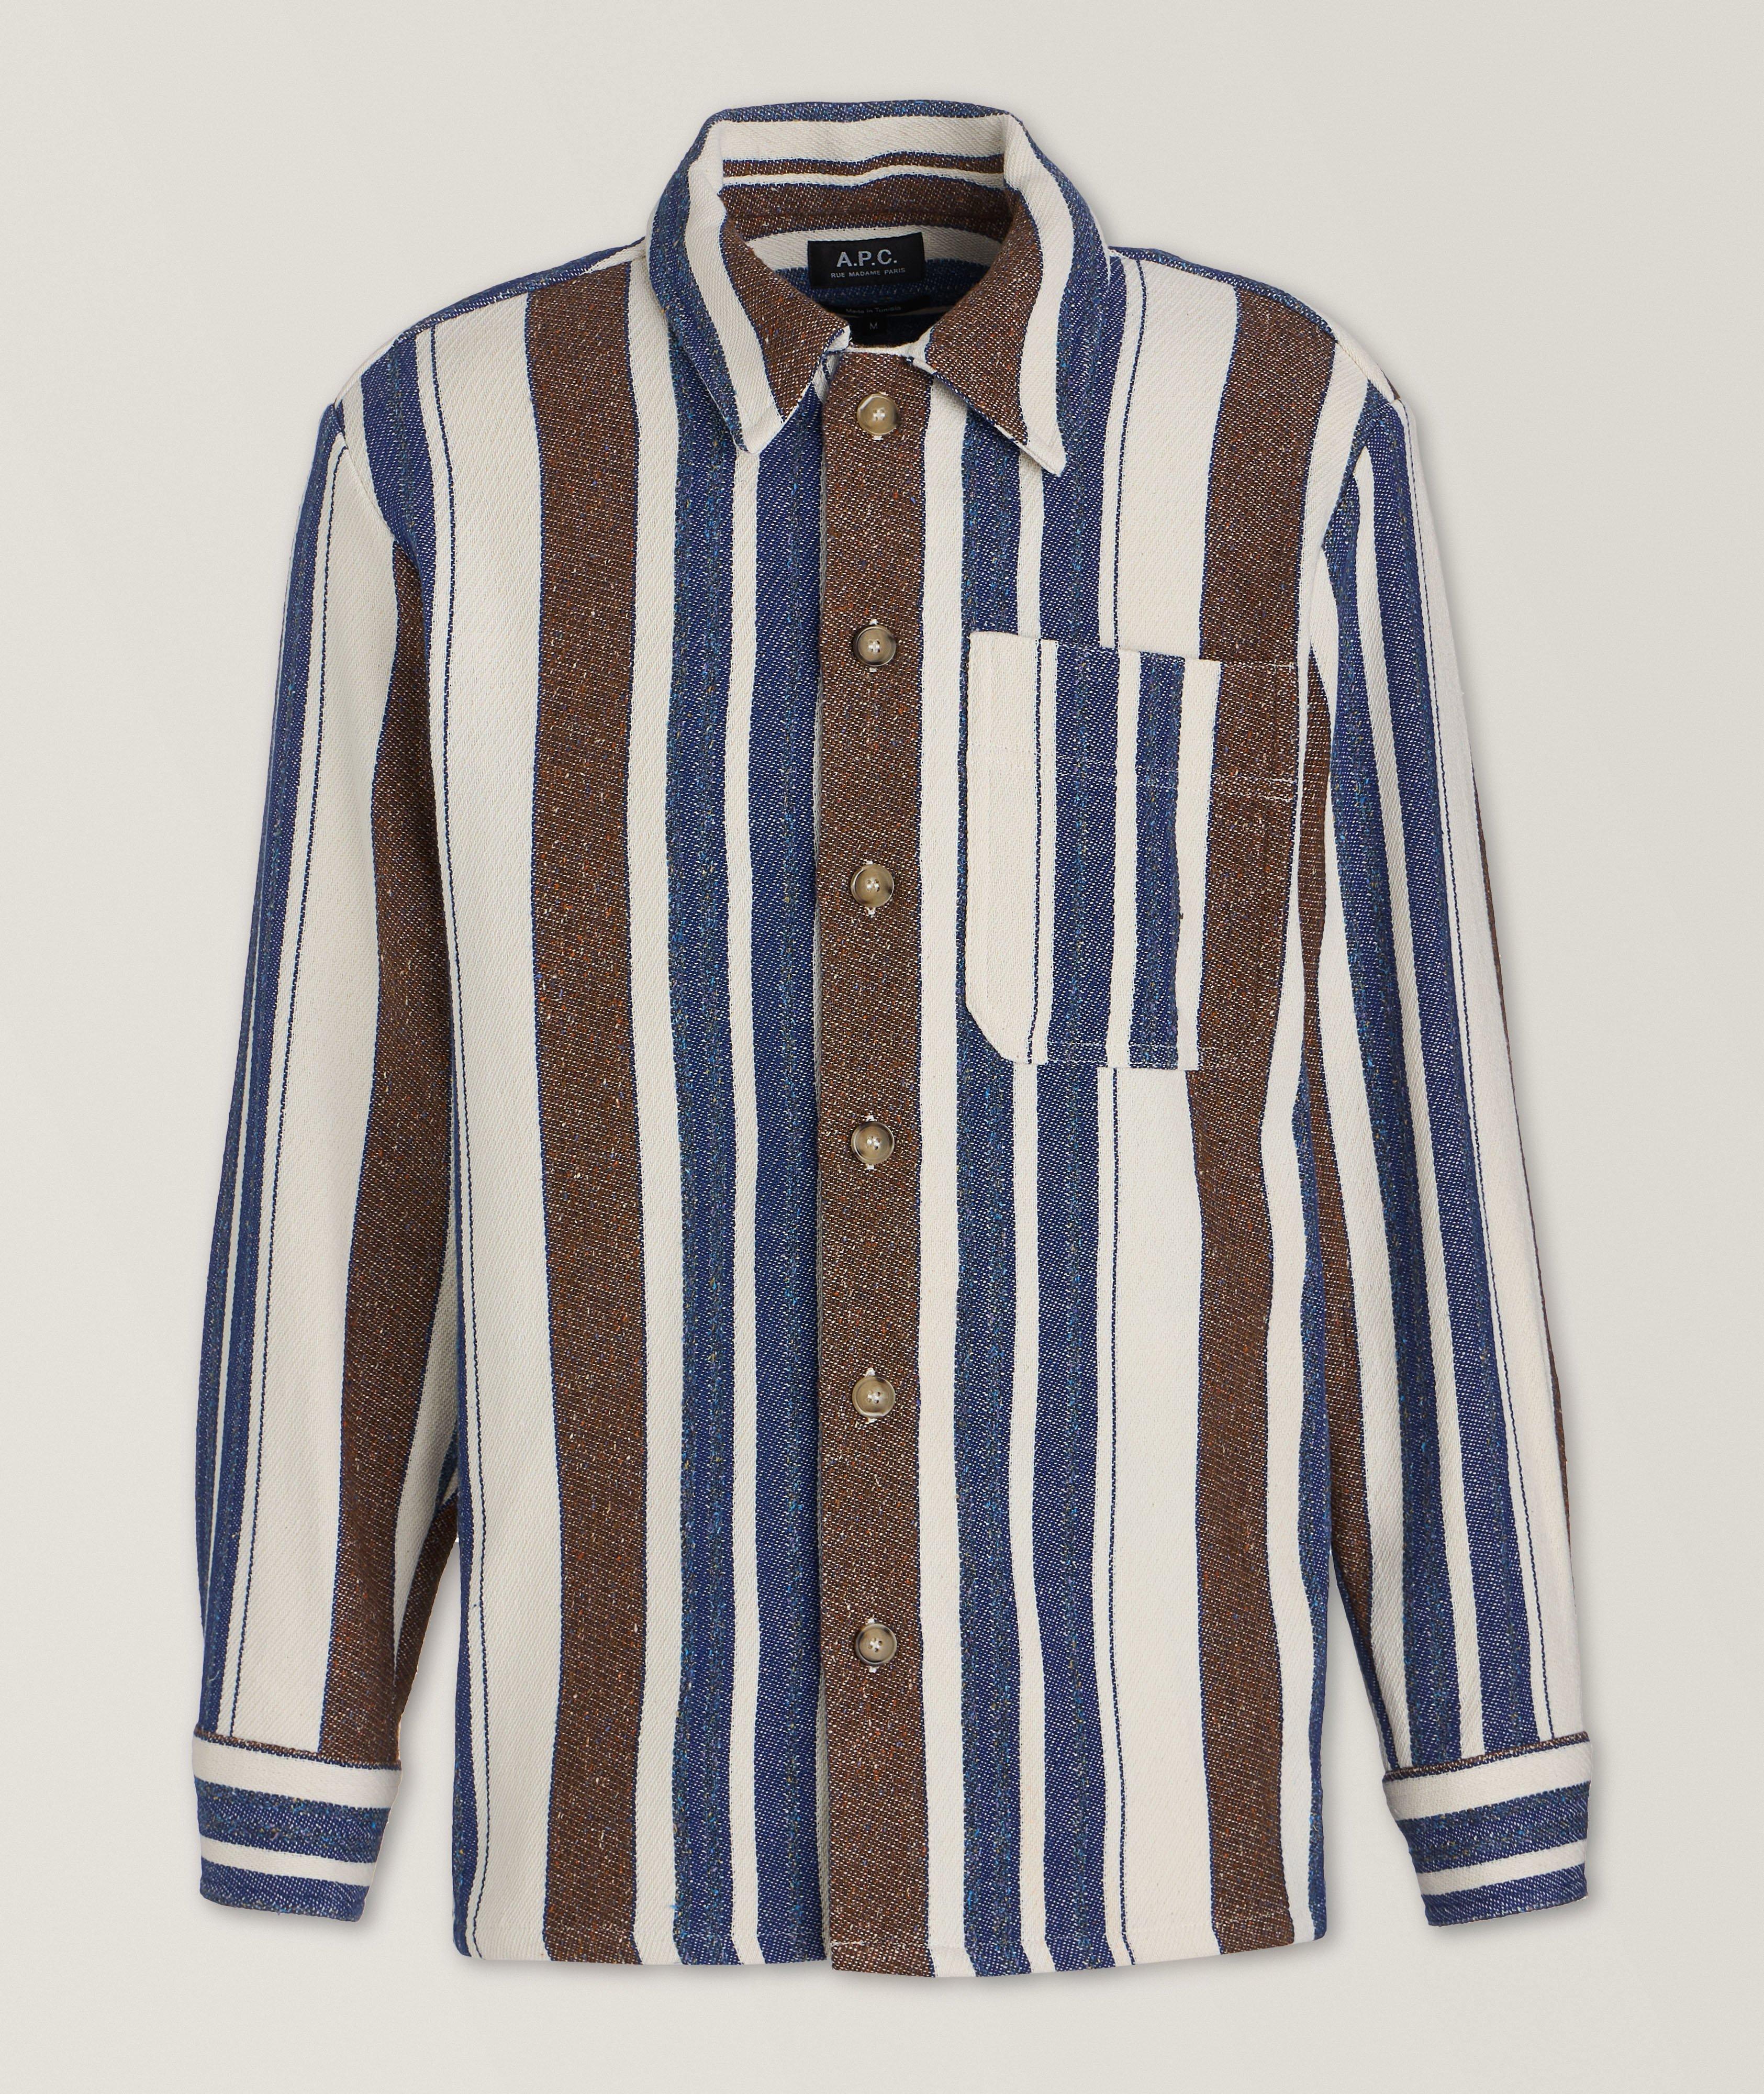 A.P.C. Stefan Recycled Cotton-Blend Overshirt